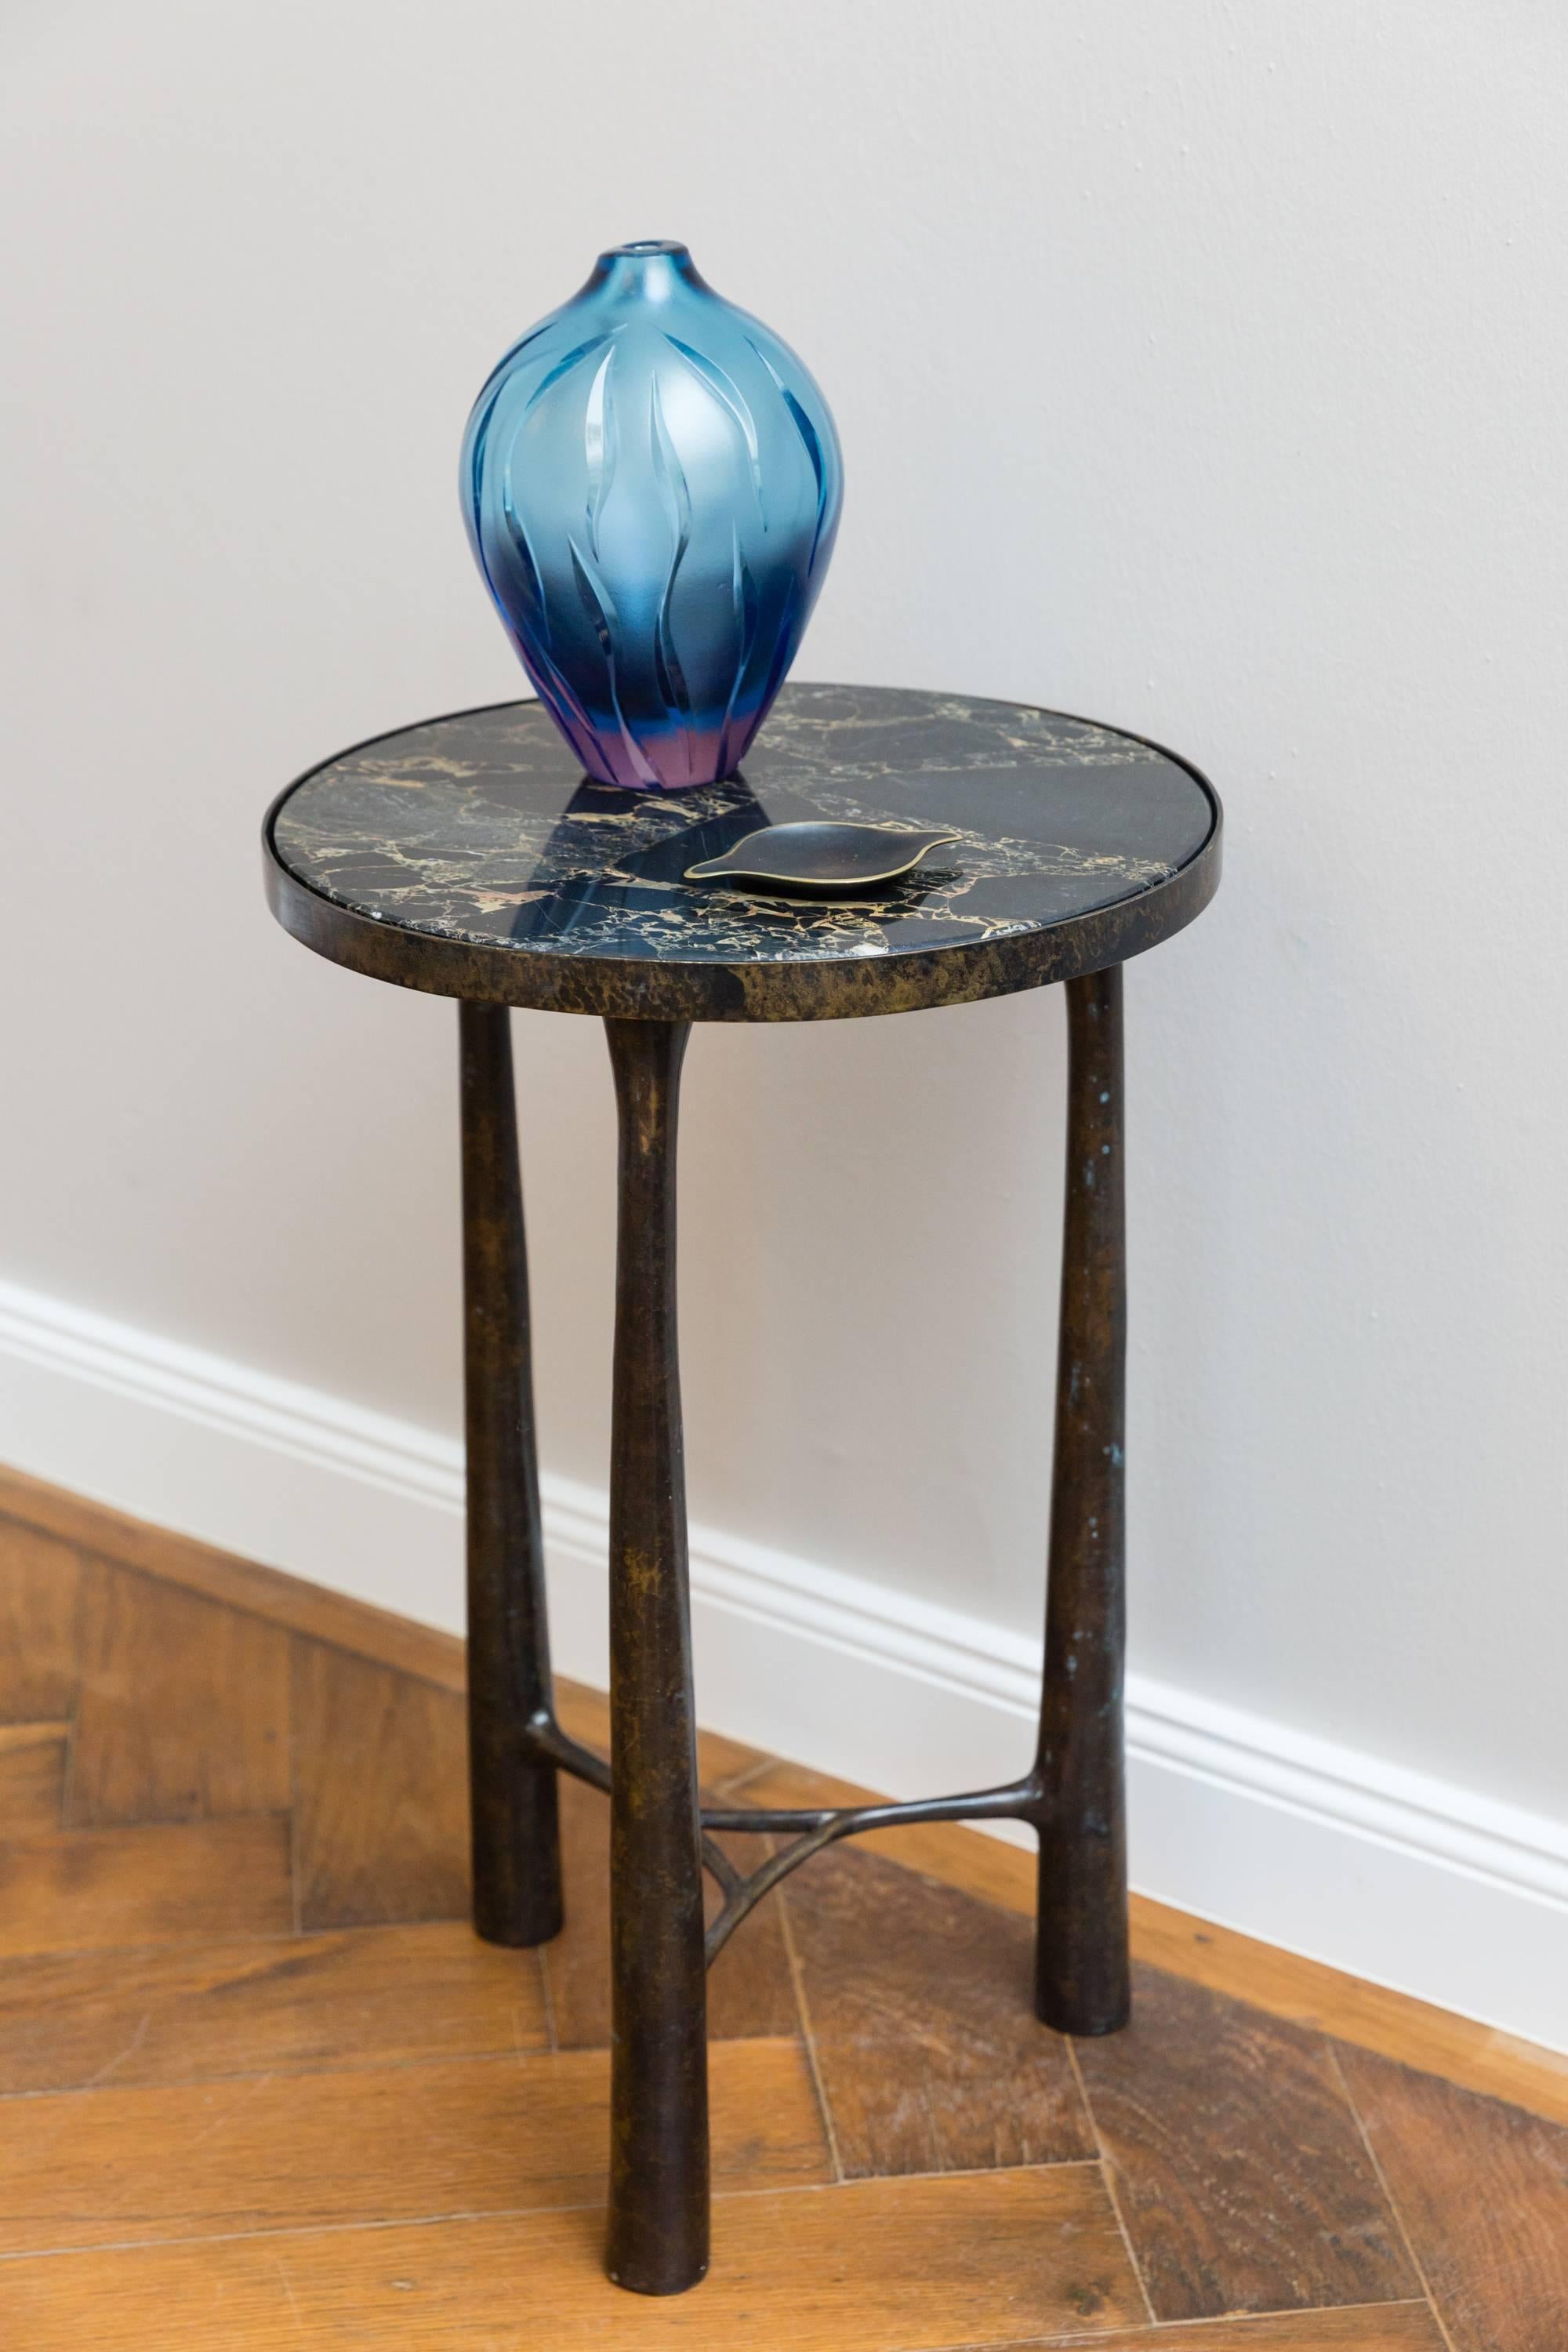 Coffee table/side table bronze and marble, limited edition, handmade bronze base, marble top.